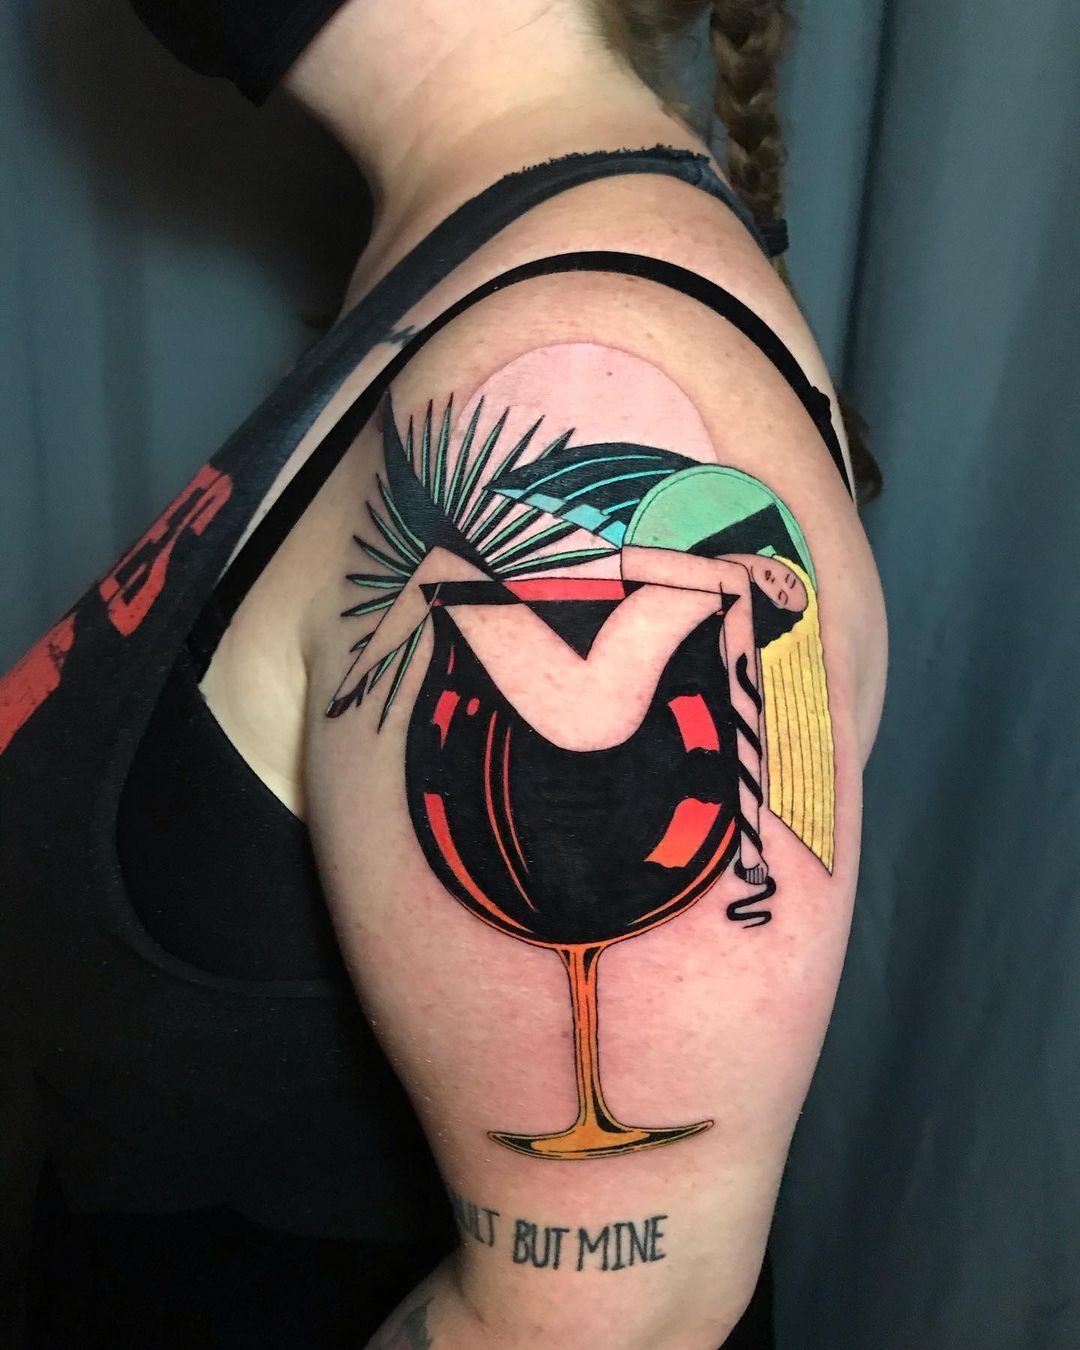 Completed by Mike Graciale at Mike Graciale Tattoo Studio in Leominster MA.  : r/tattoos